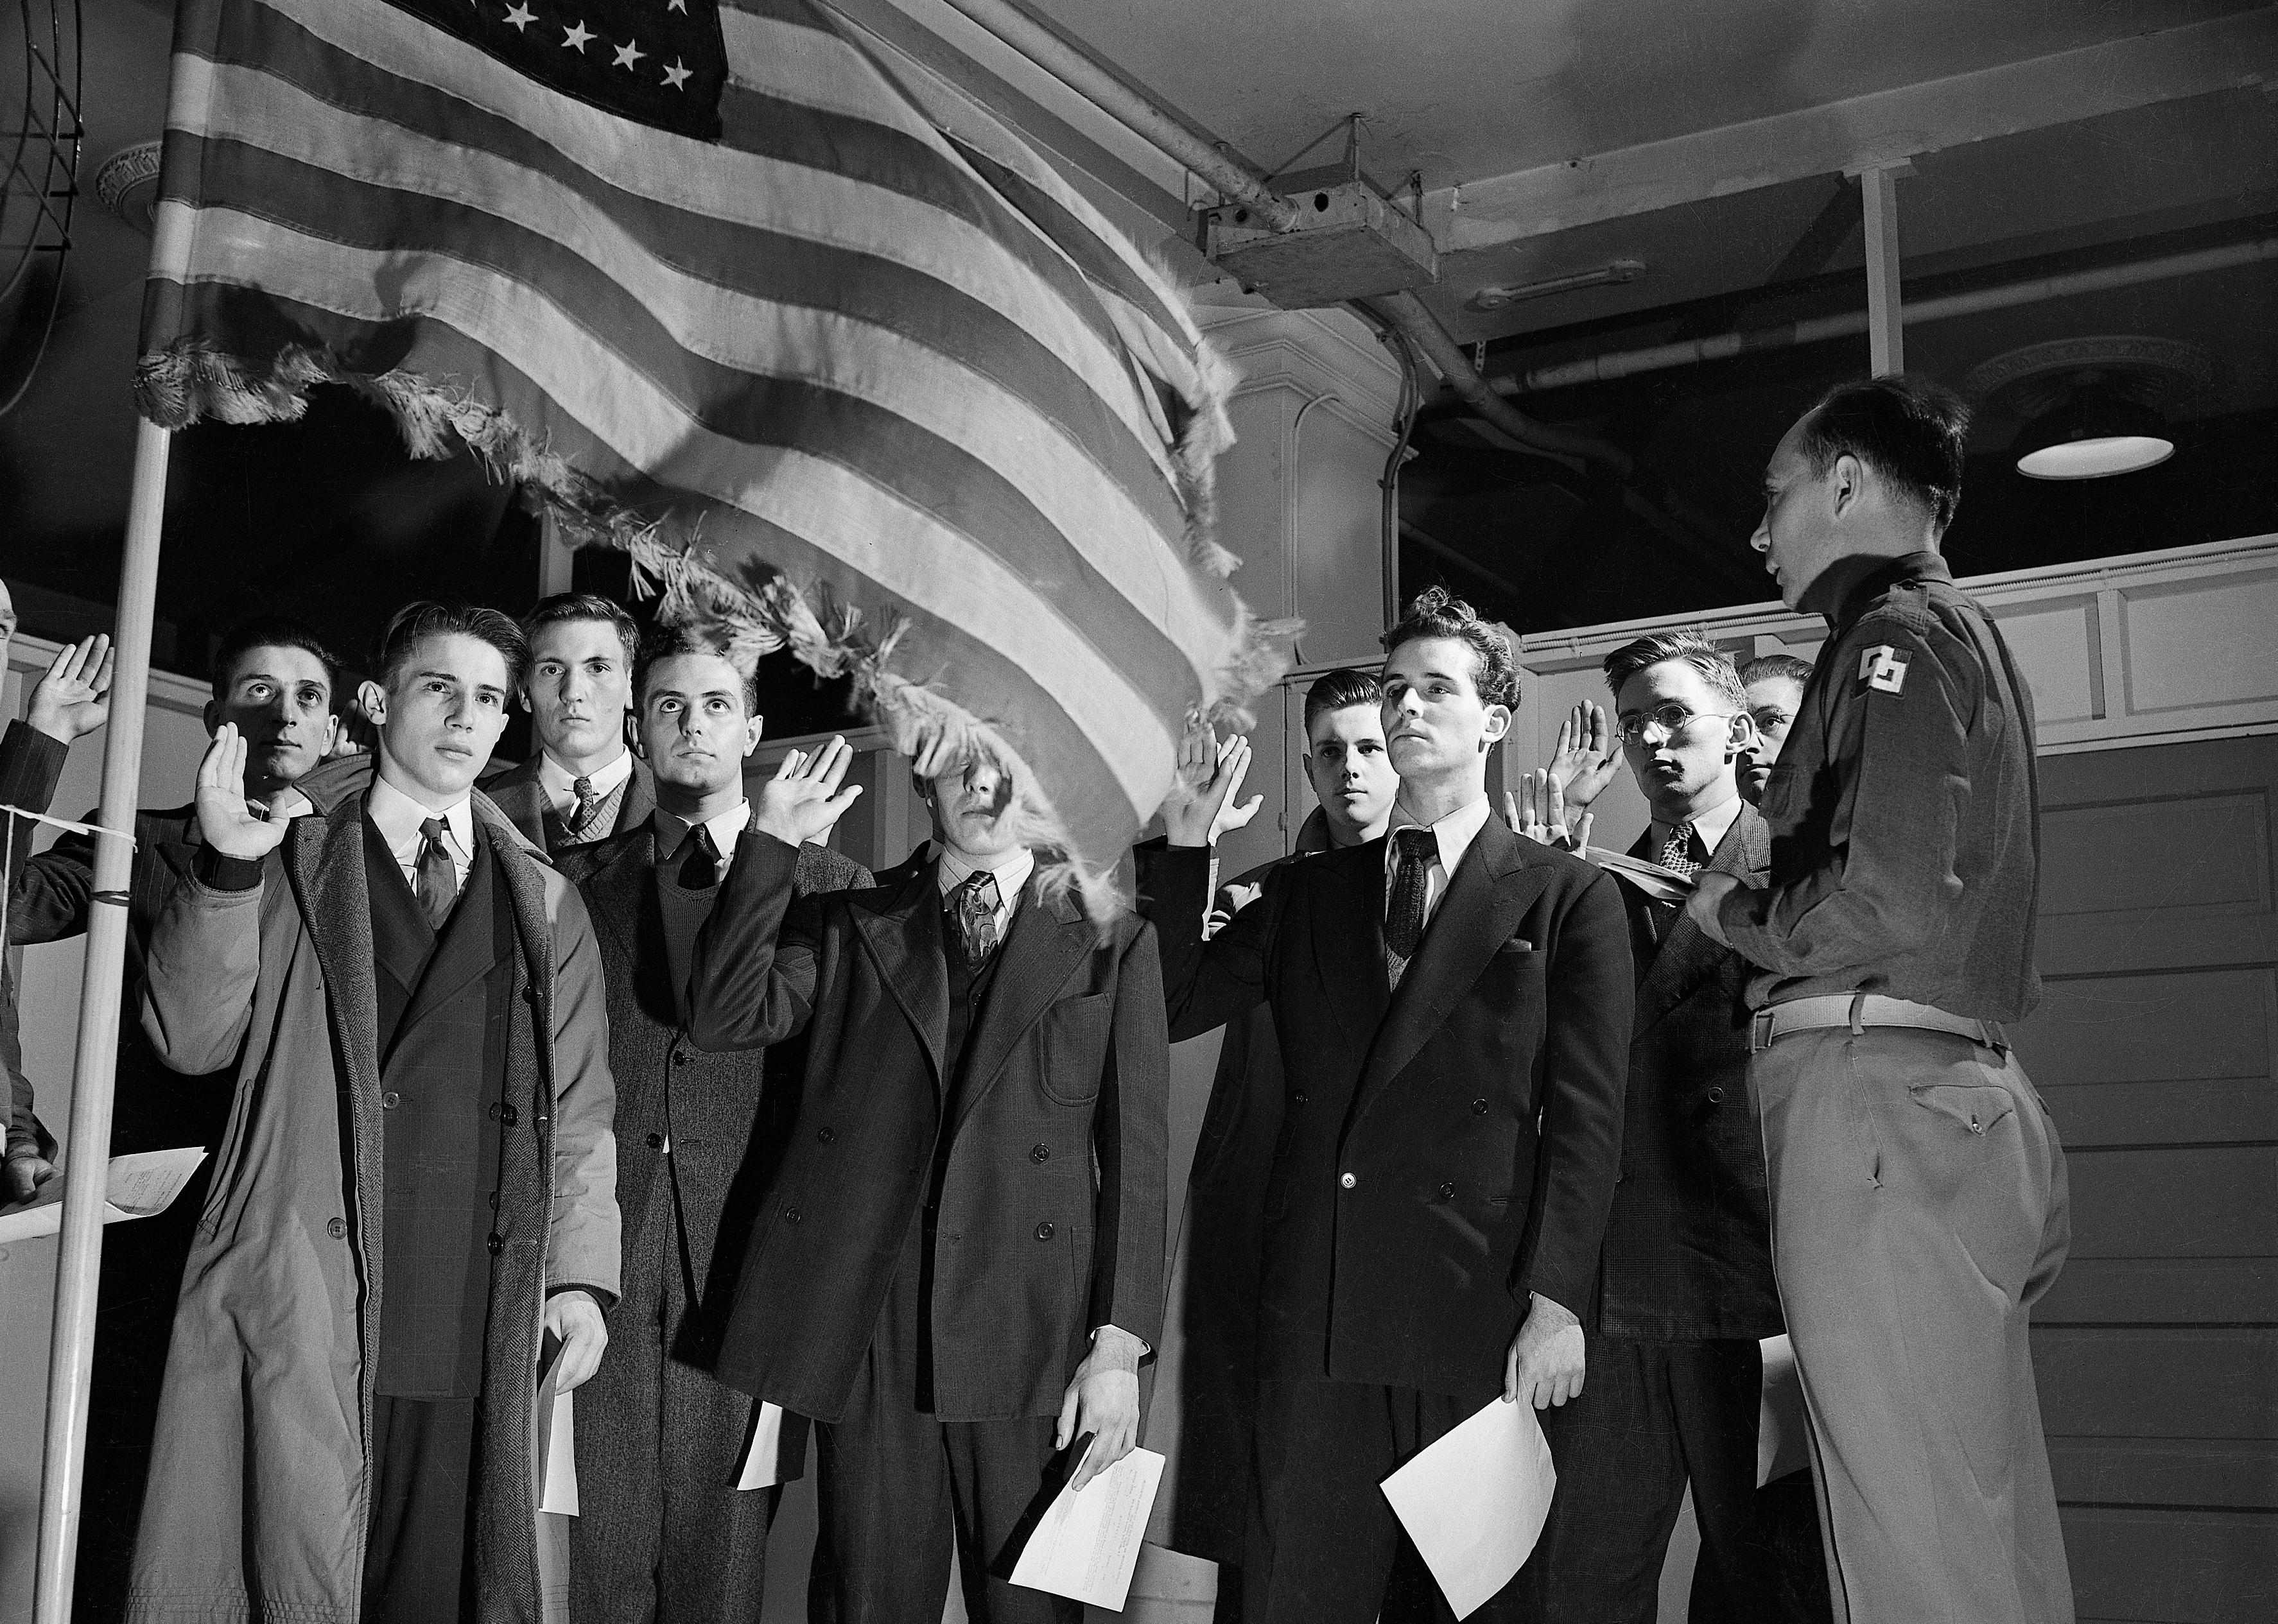 Eighteen- and 19-year-old men take their oath upon entering the receiving center at Camp Upton.